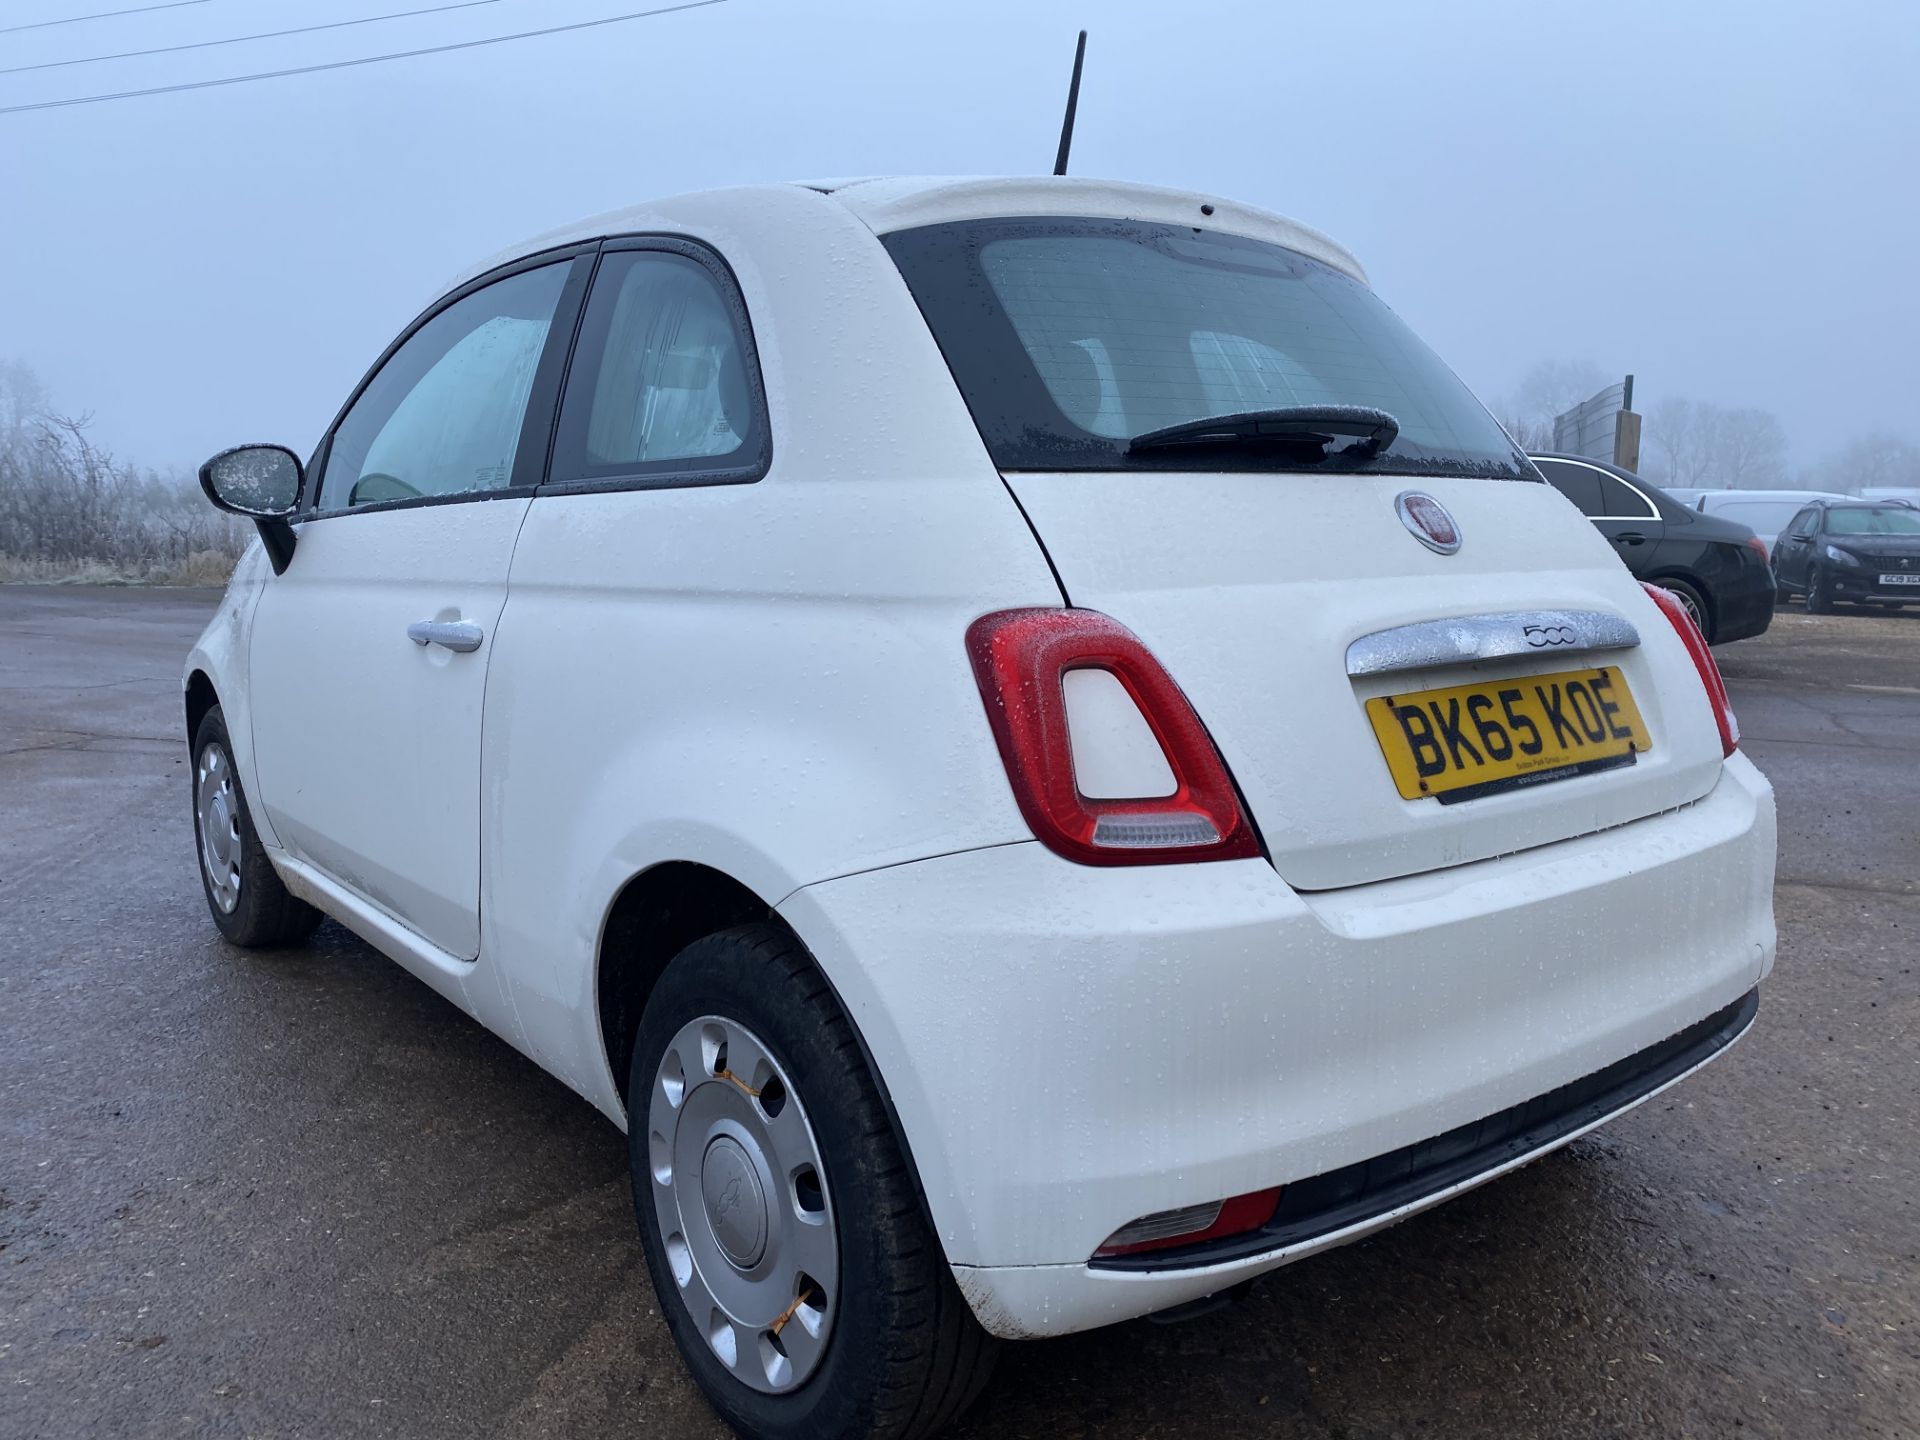 On Sale FIAT 500 "POP" 1.2 PETROL - 2016 MODEL - 1 KEEPER - ONLY 44K MILES FROM NEW - AIR CON - LOOK - Image 6 of 18